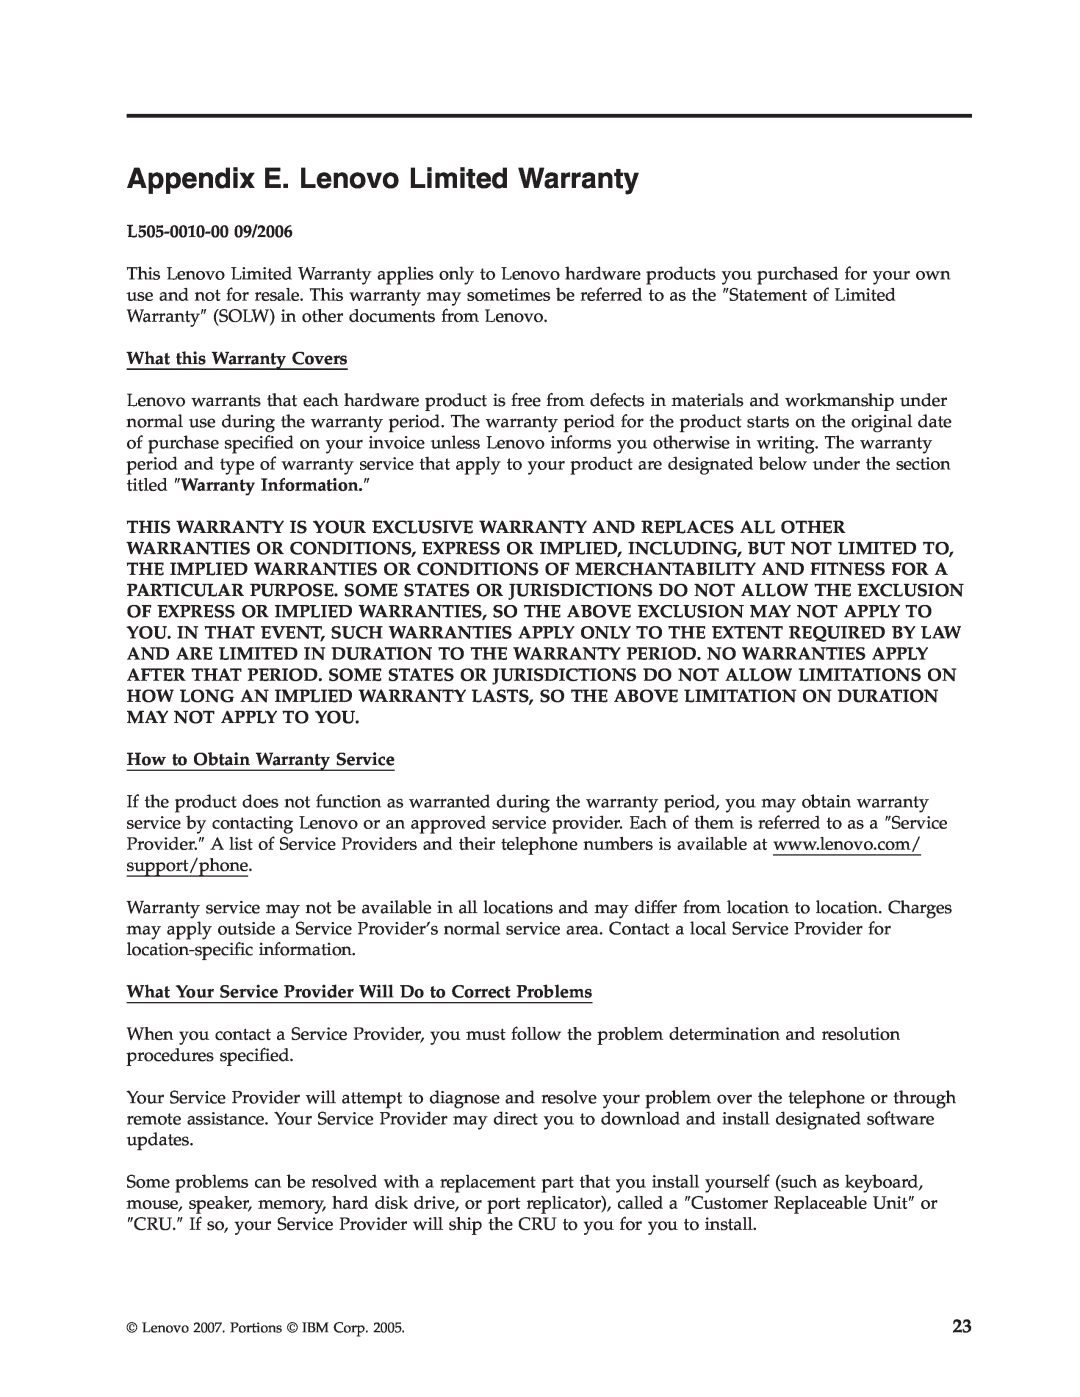 Lenovo 41N5647 manual Appendix E. Lenovo Limited Warranty, L505-0010-0009/2006, What this Warranty Covers 